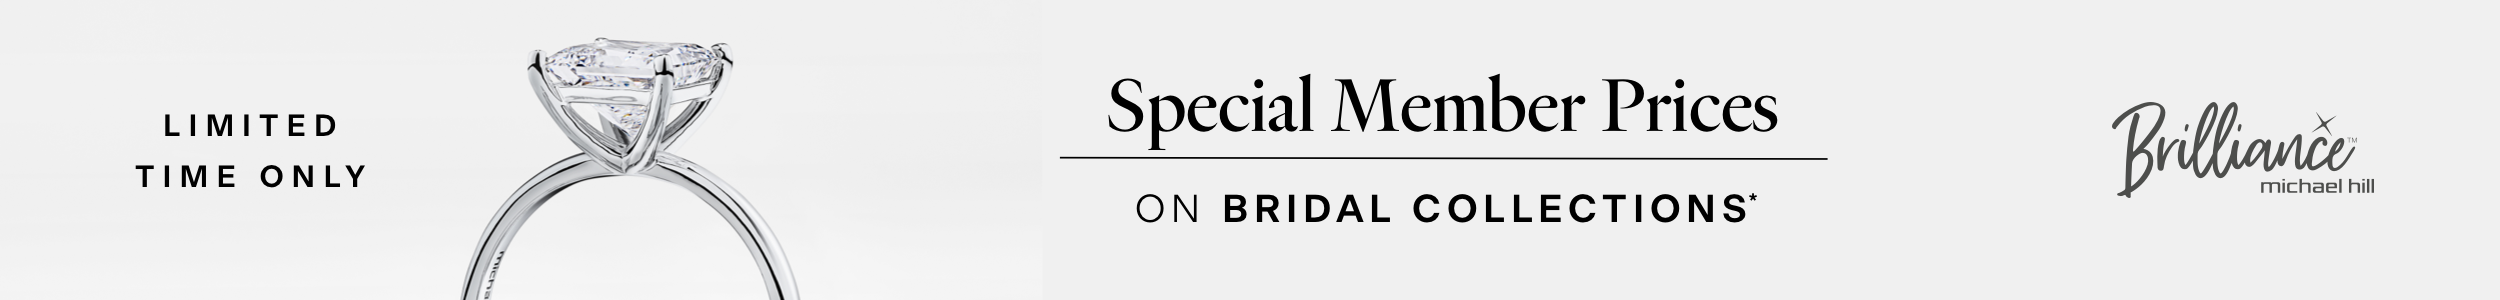 Brilliance offer on selected bridal collections